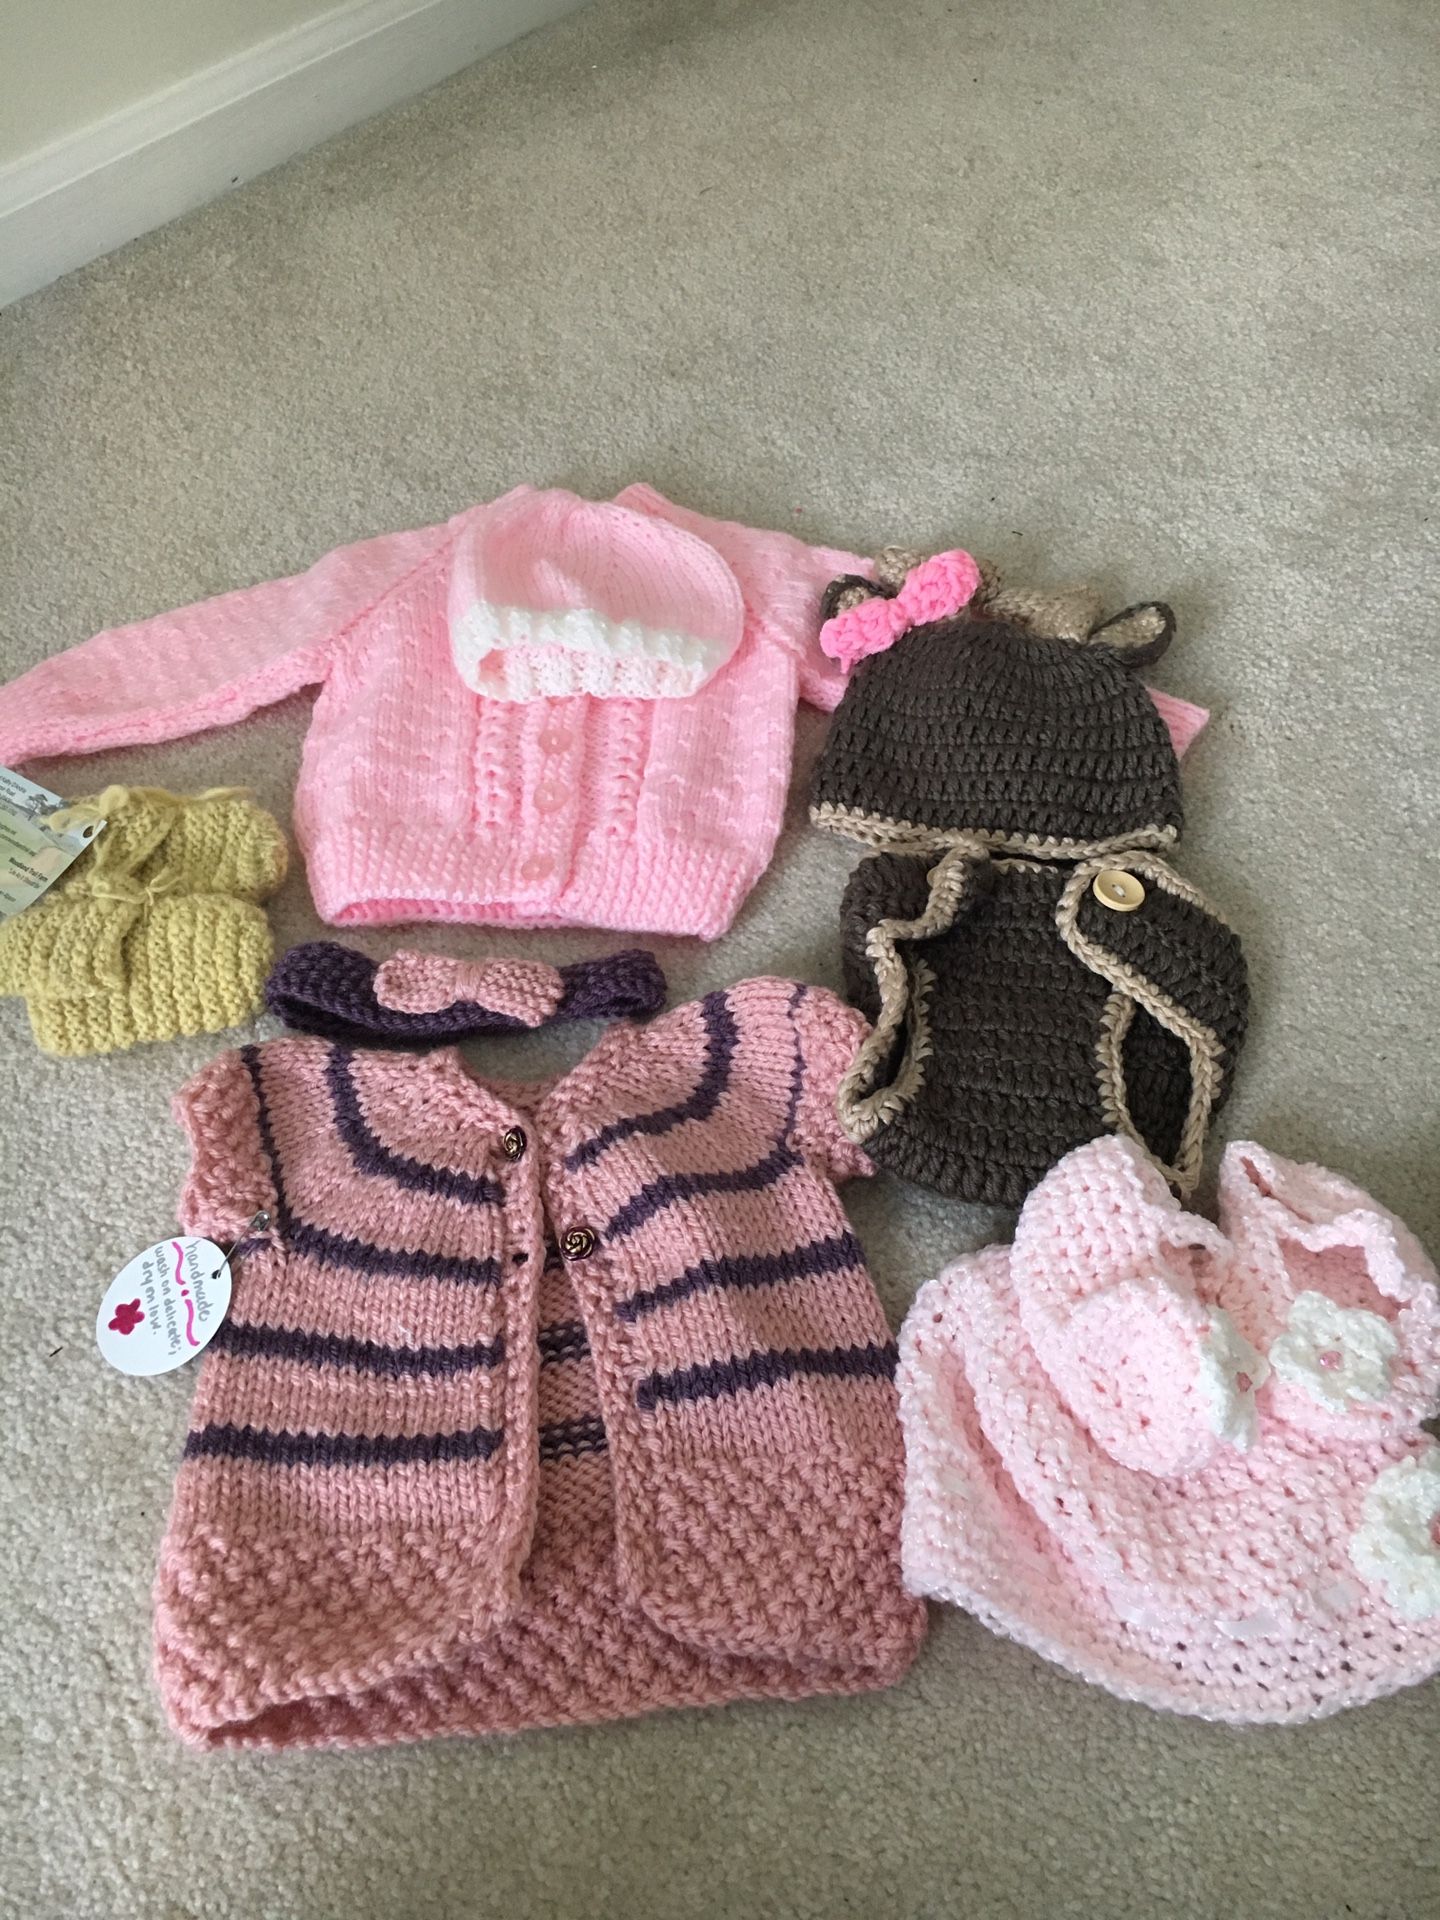 New handmade knit baby clothes sweaters booties